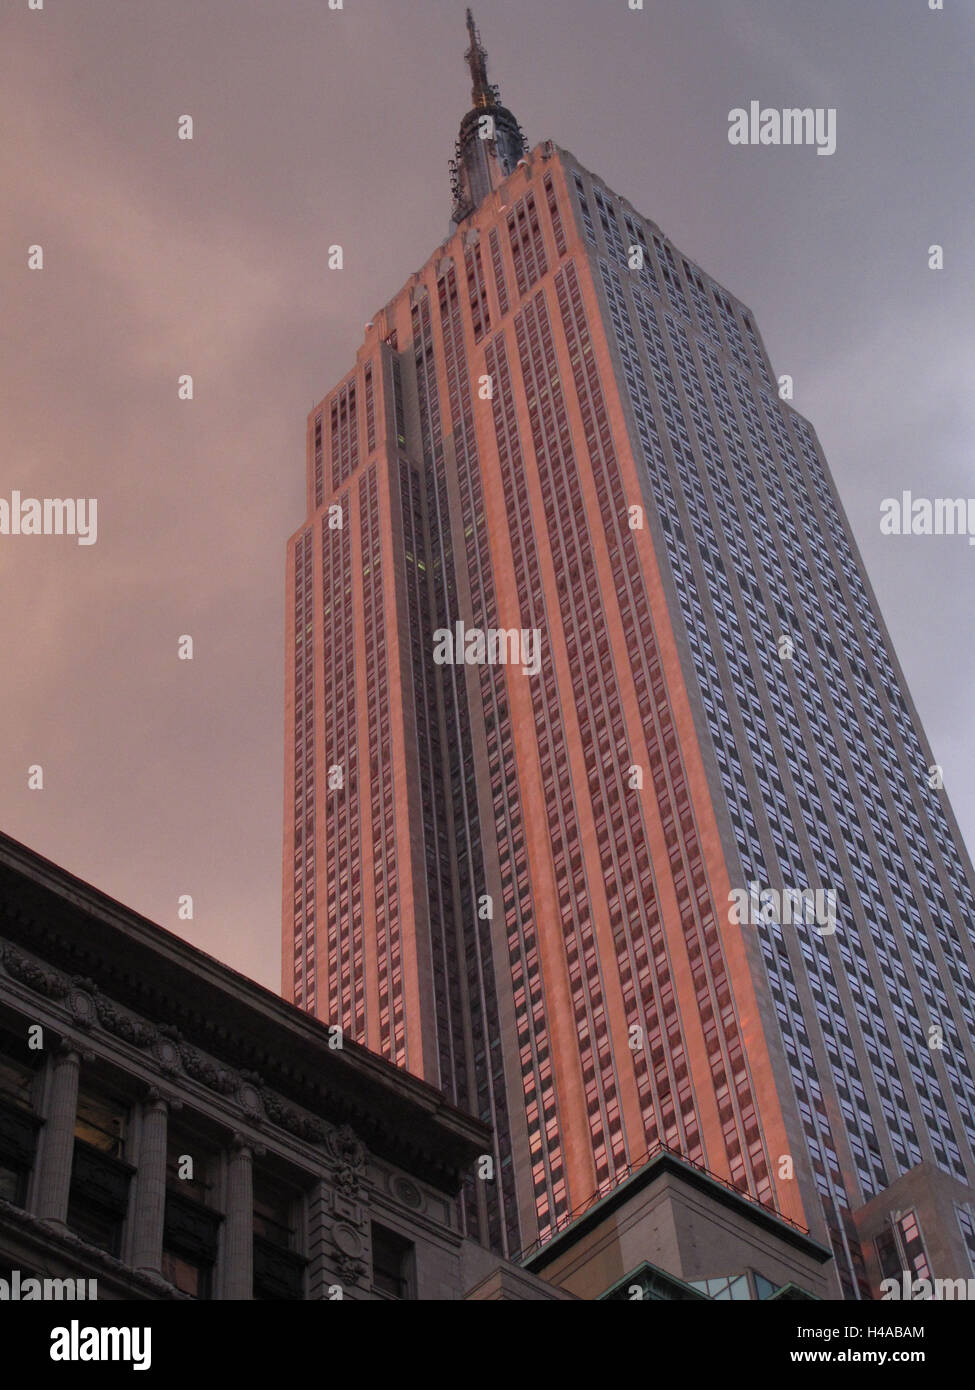 USA, New York City, Empire State Building in the evening light, Stock Photo